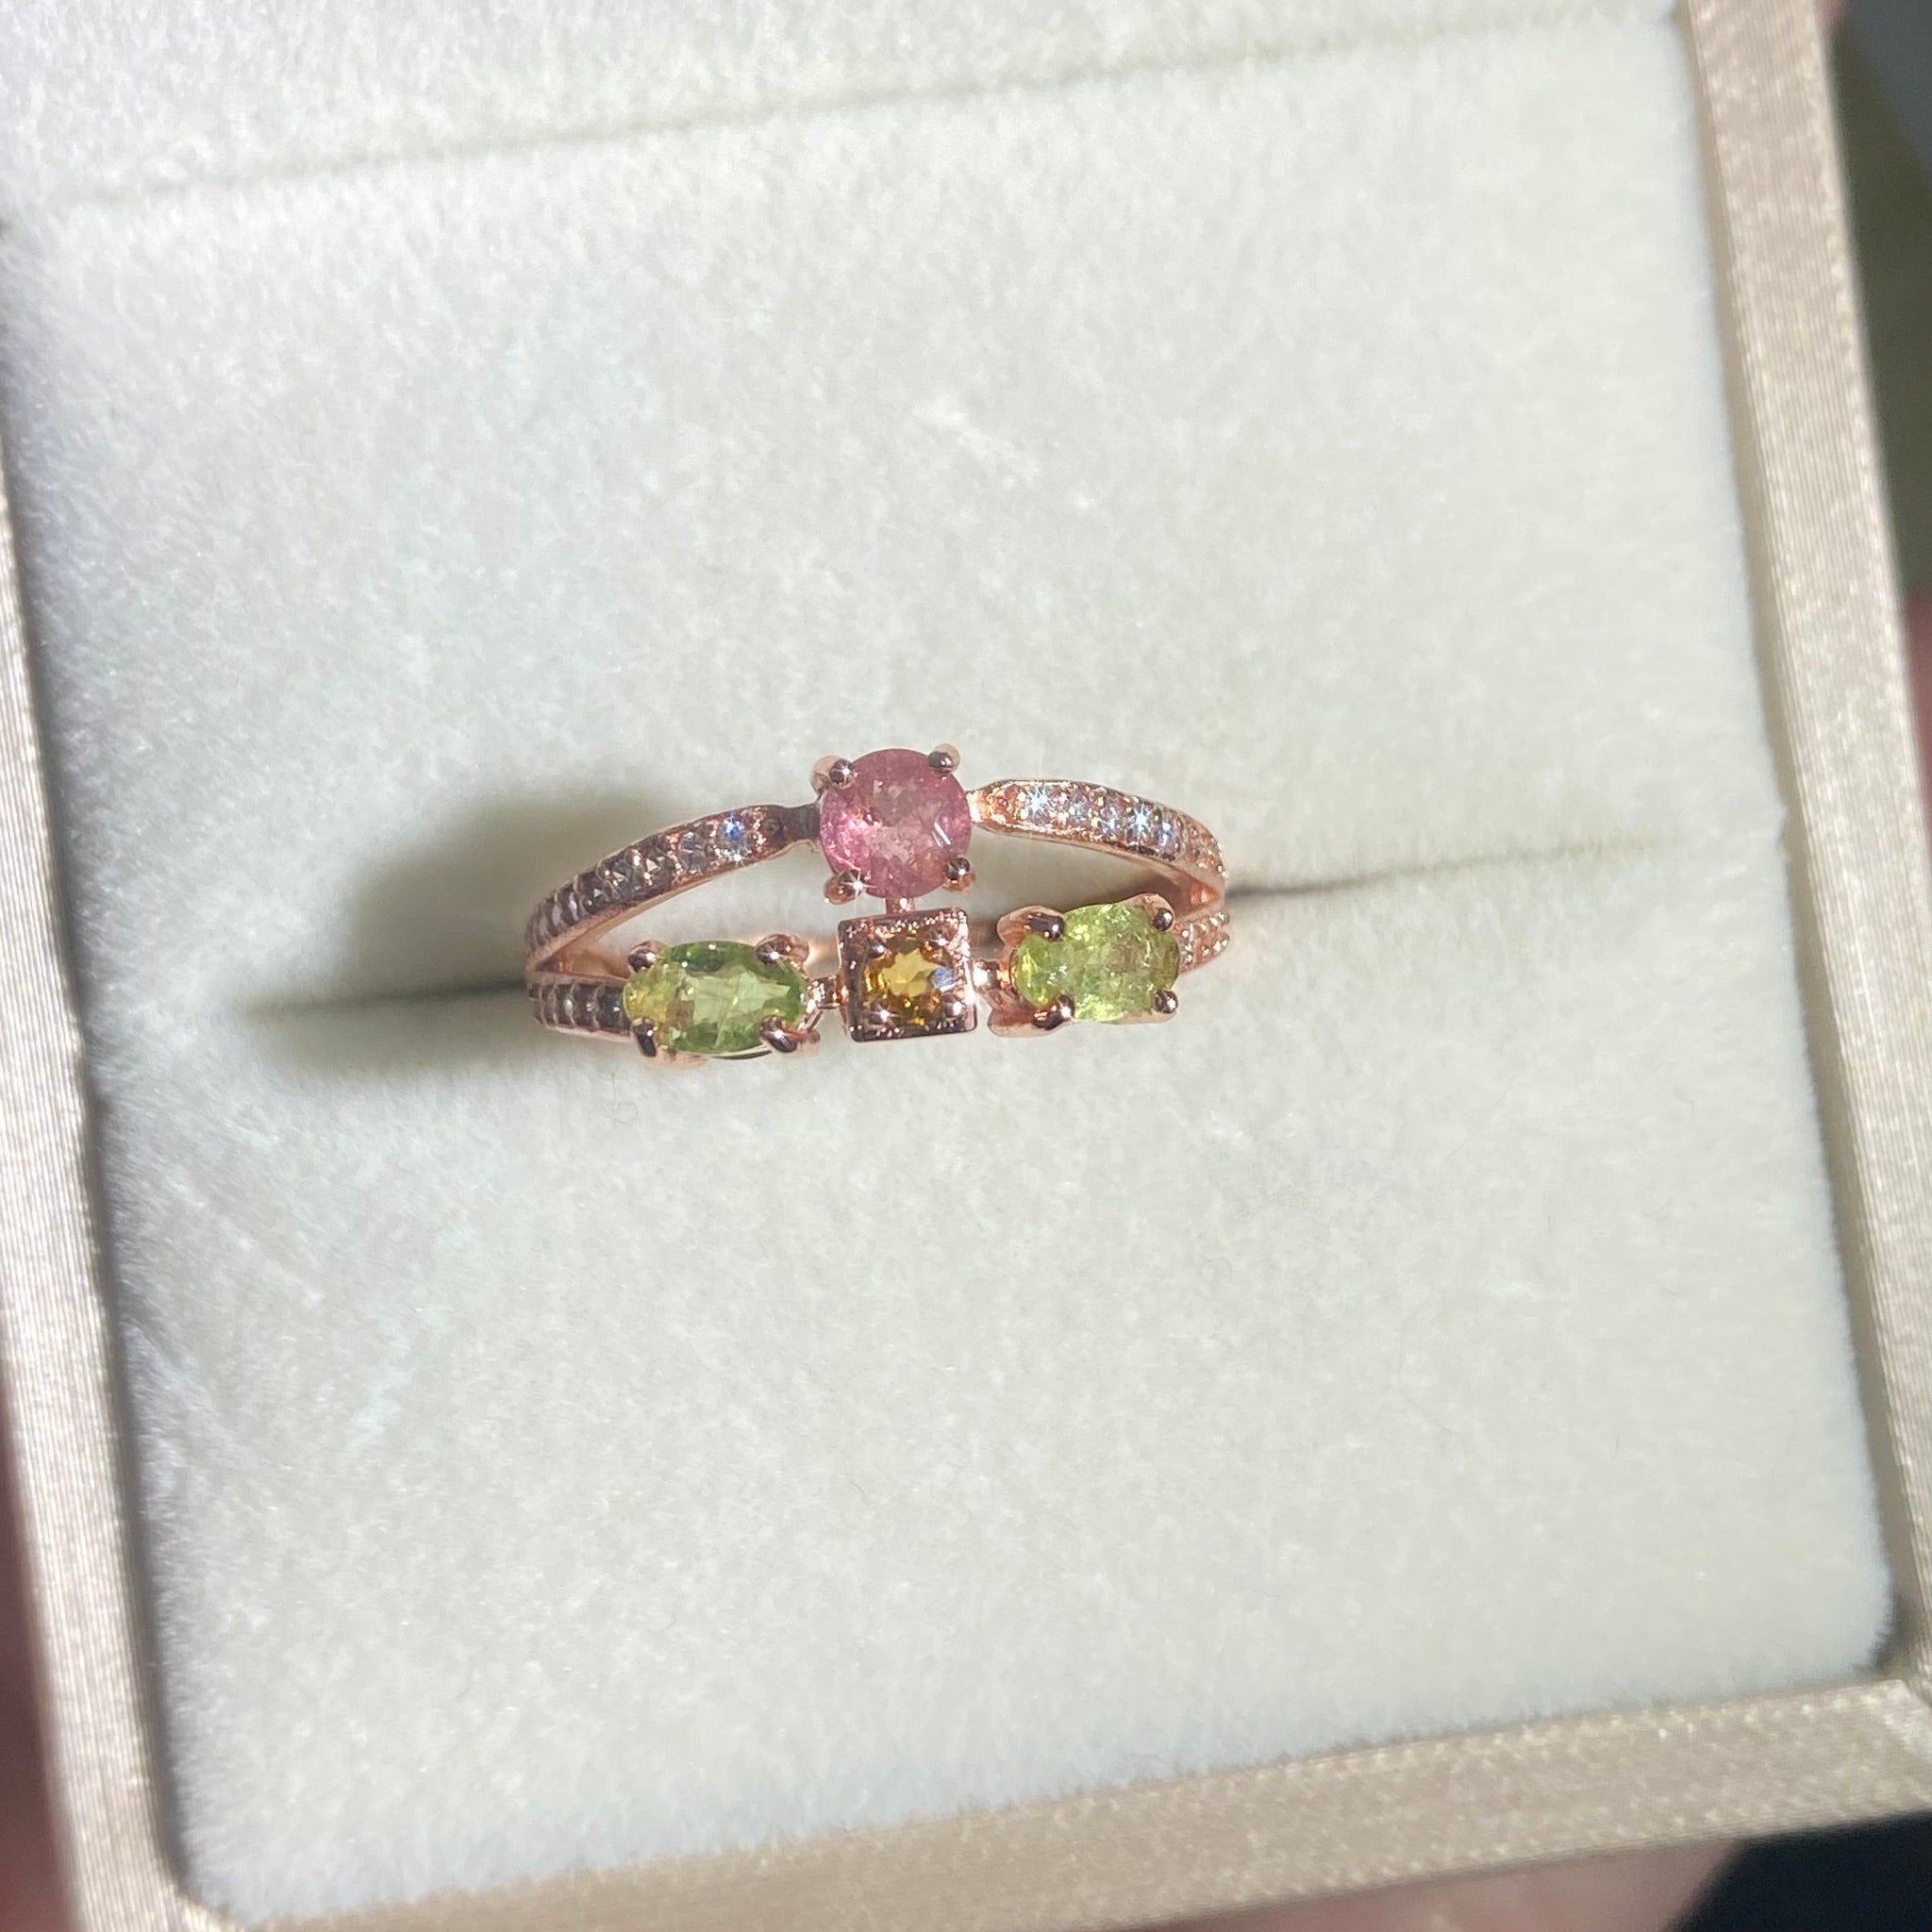 S925 Sterling Silver Natural Tourmaline Double Row Ring.